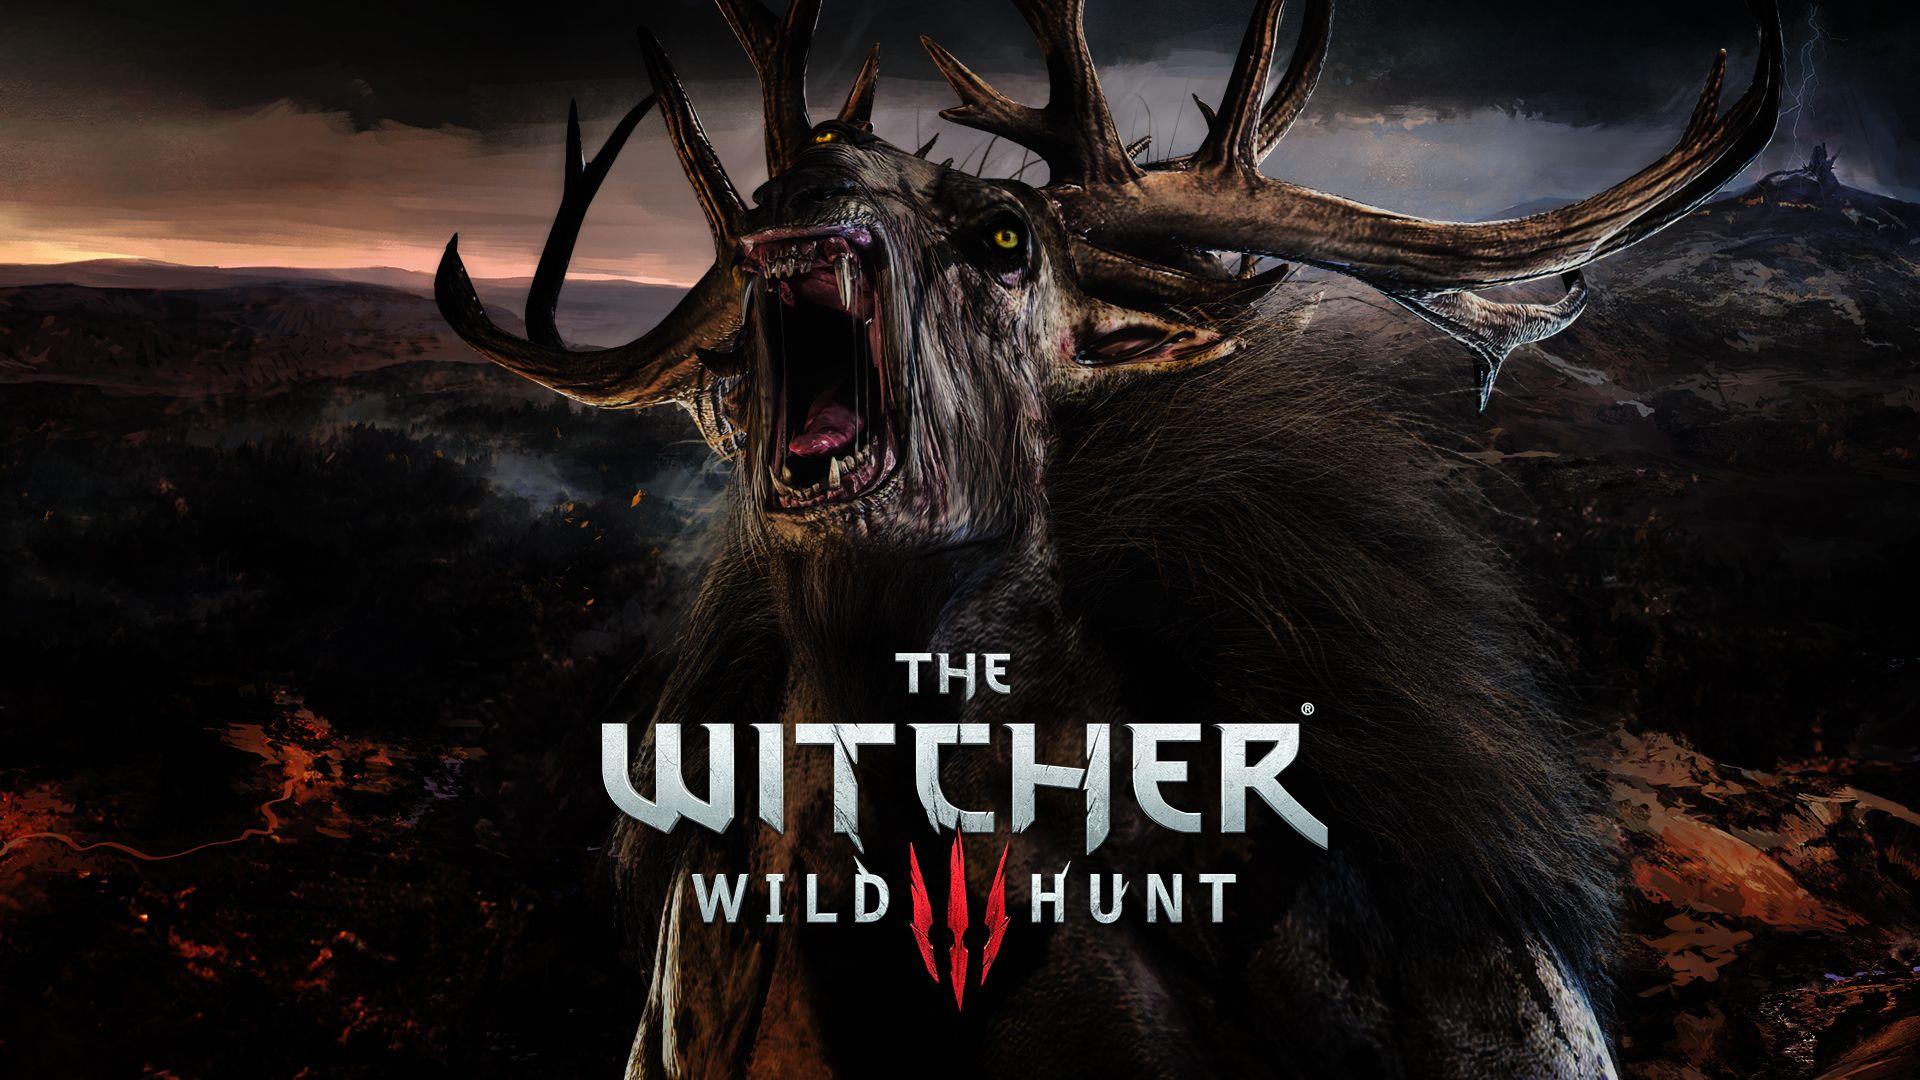 Wallpaper Wallpaper from The Witcher 3: Wild Hunt